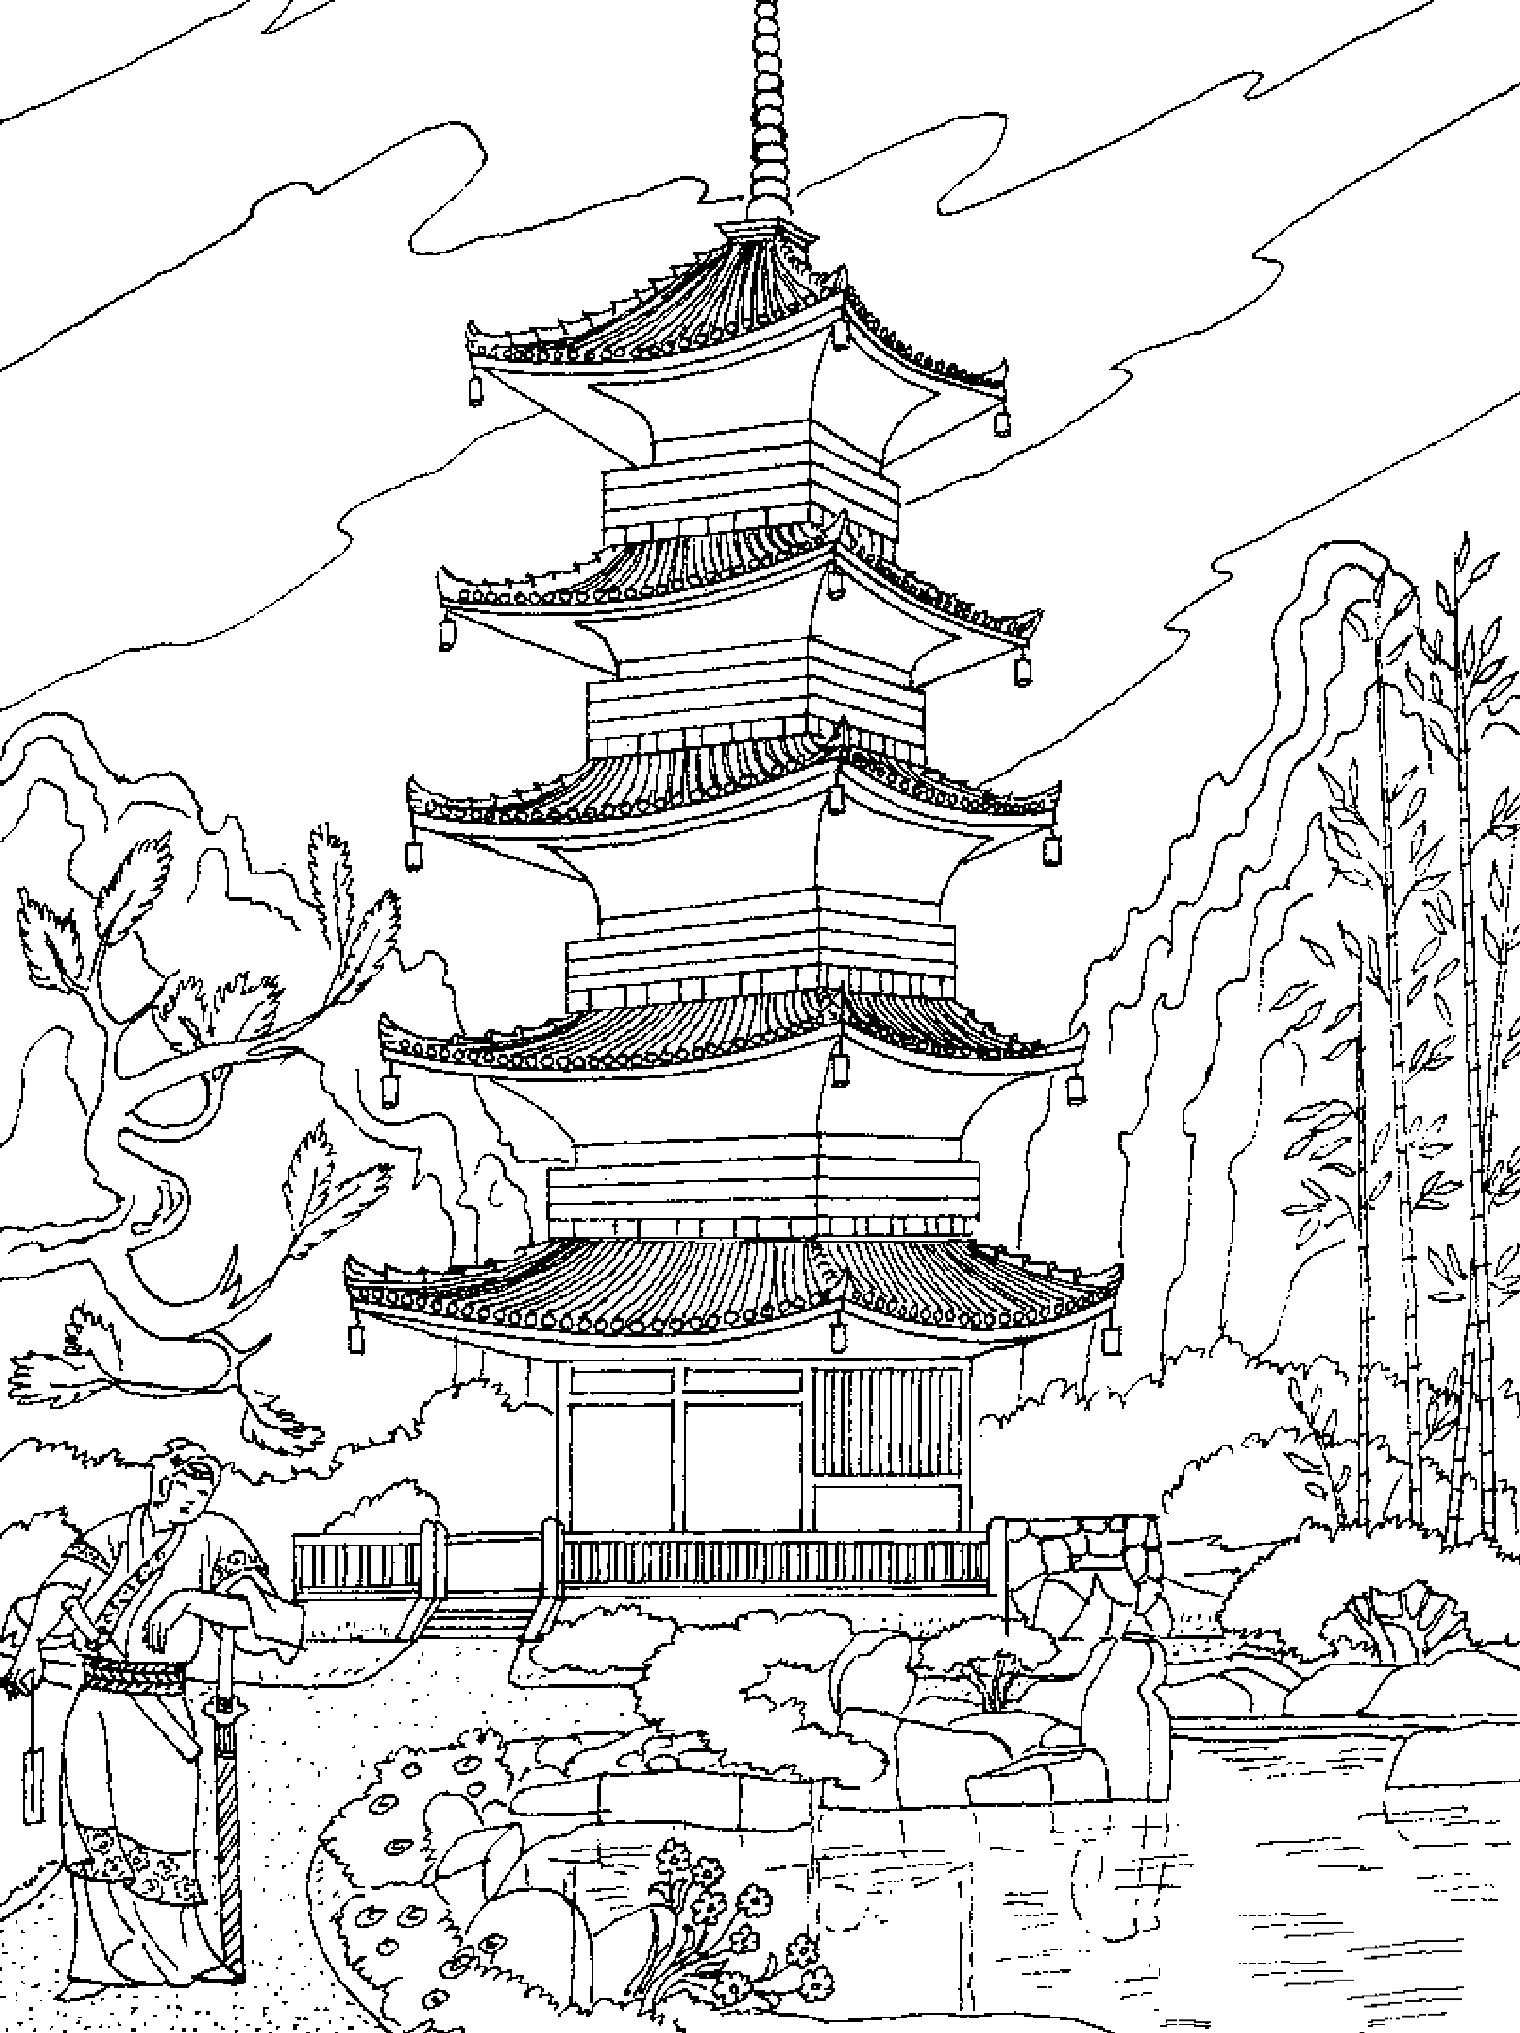 China & Asia - Coloring Pages for adults